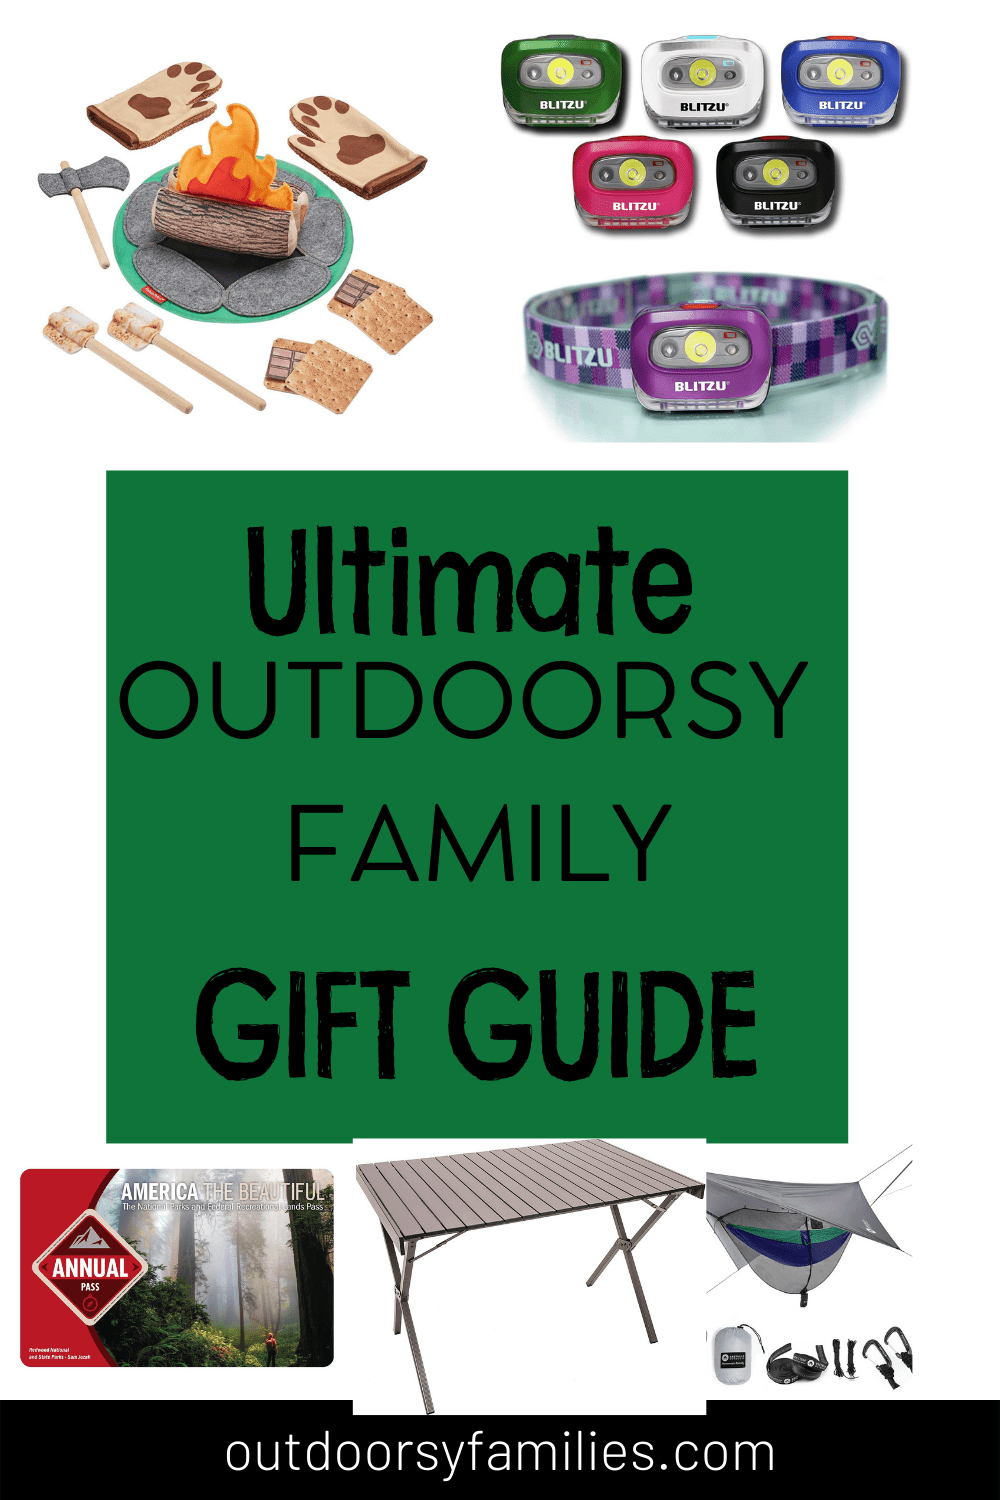 Gift Guide for Outdoorsy Families